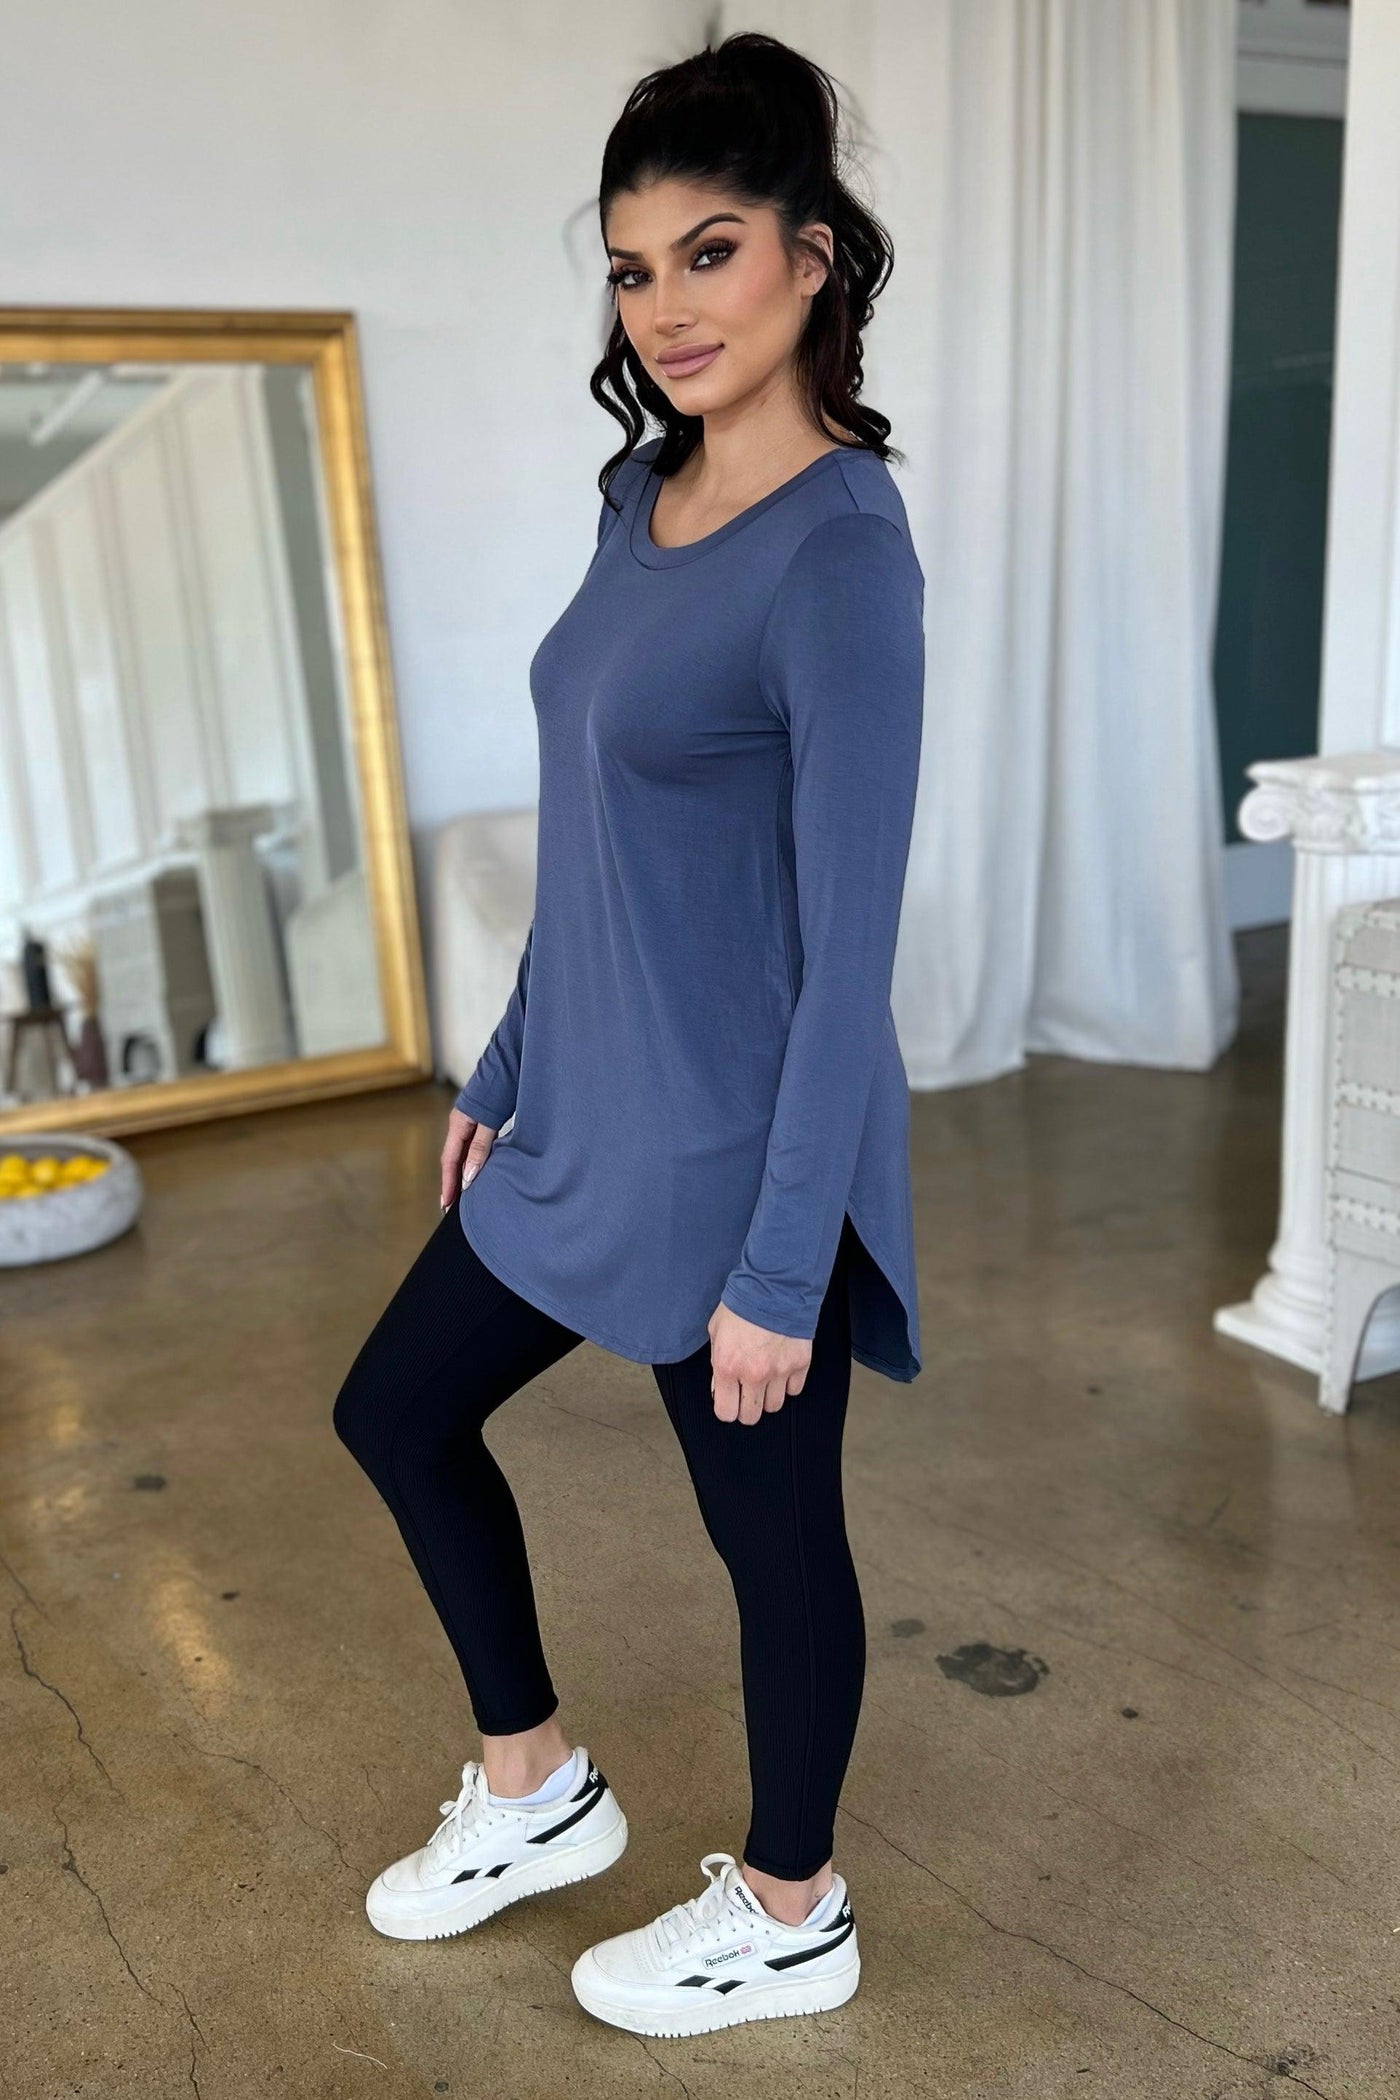 BEVERLY LONG SLEEVED TOP (PLUS AVAILABLE) , Shirts & Tops , it’sNOMB. The Label , BEVERLY, bump friendly, crew neck, crewneck, it's nomb, it's nomb the label, Its None of My Business, ITSNOMB, ITSNOMBTHELABEL, IT’S NOMB, Jessica Graf, Jessica Nickson, LONG SLEEVE, LONG SLEEVED BUTTERY SOFT TSHIRT, LONG SLEEVED TEE, Maternity, Maternity Friendly, SHIRT, SHIRTS, SOFT LONG SLEEVED TEE, tops , It's NOMB , itsnomb.com